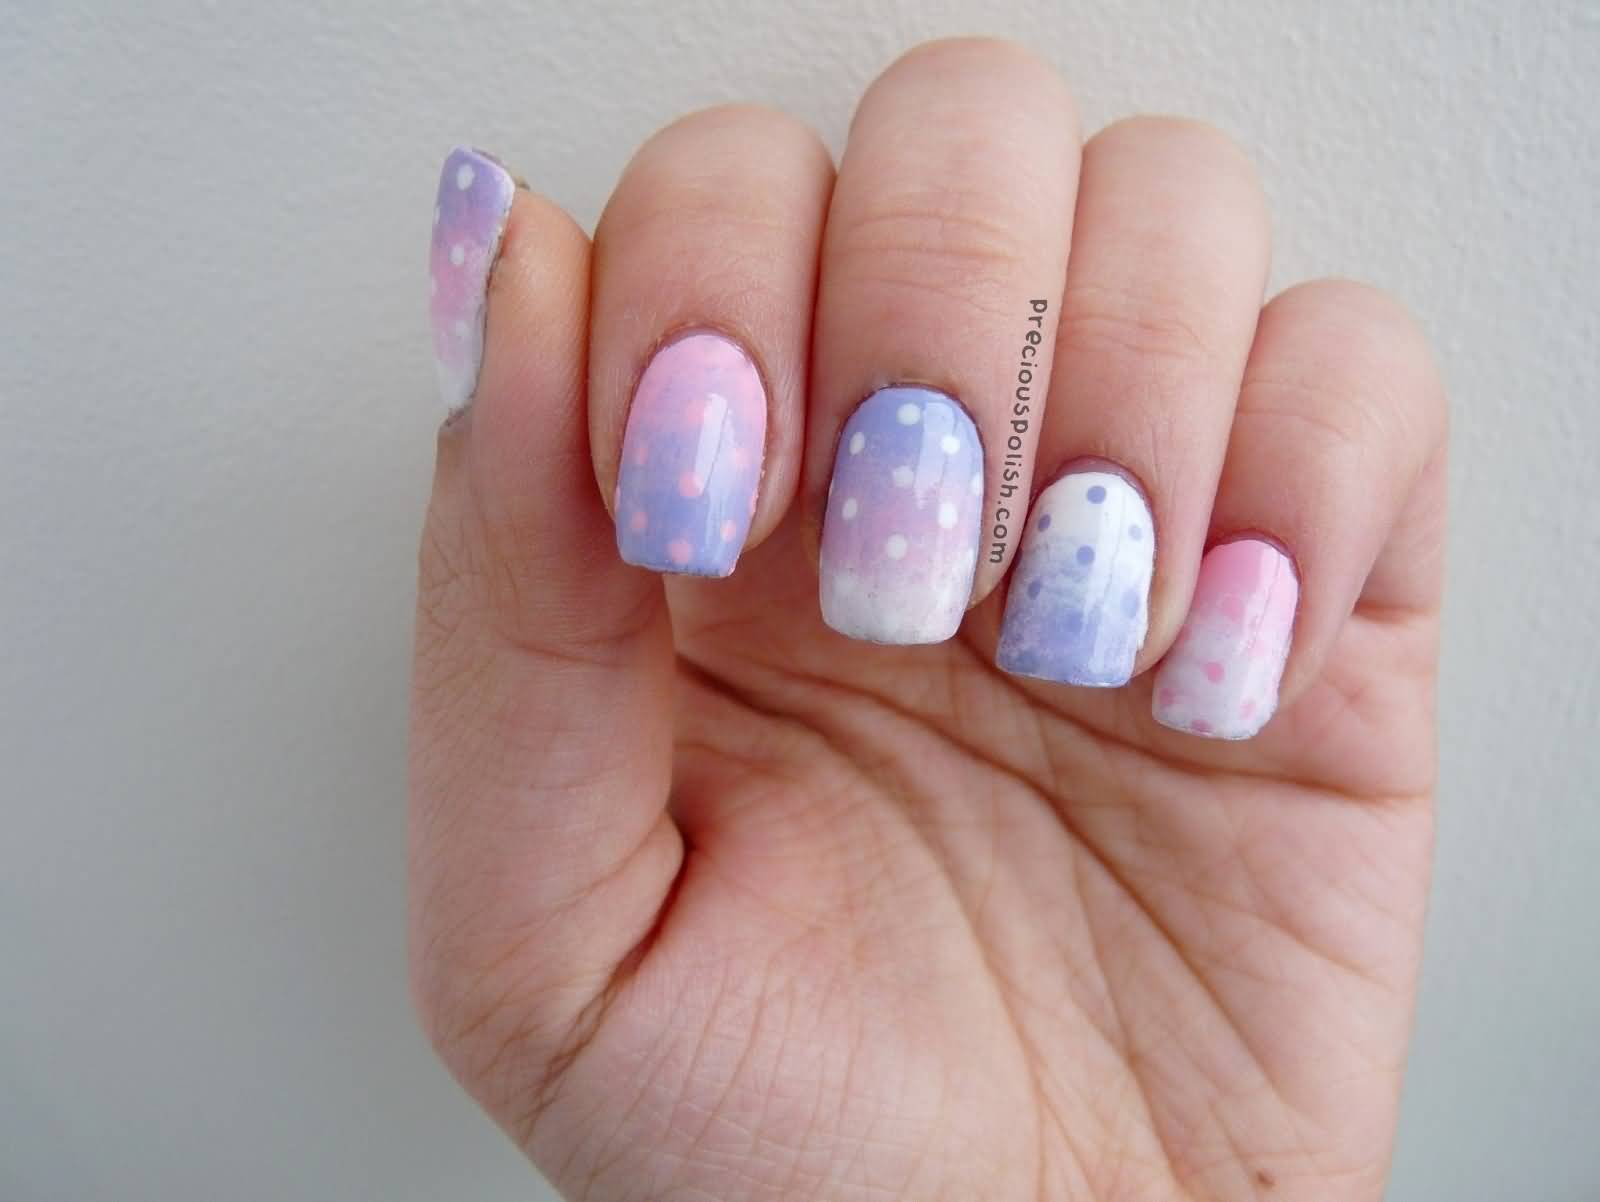 5. How to Create a Pastel Ombre Nail Design - wide 5